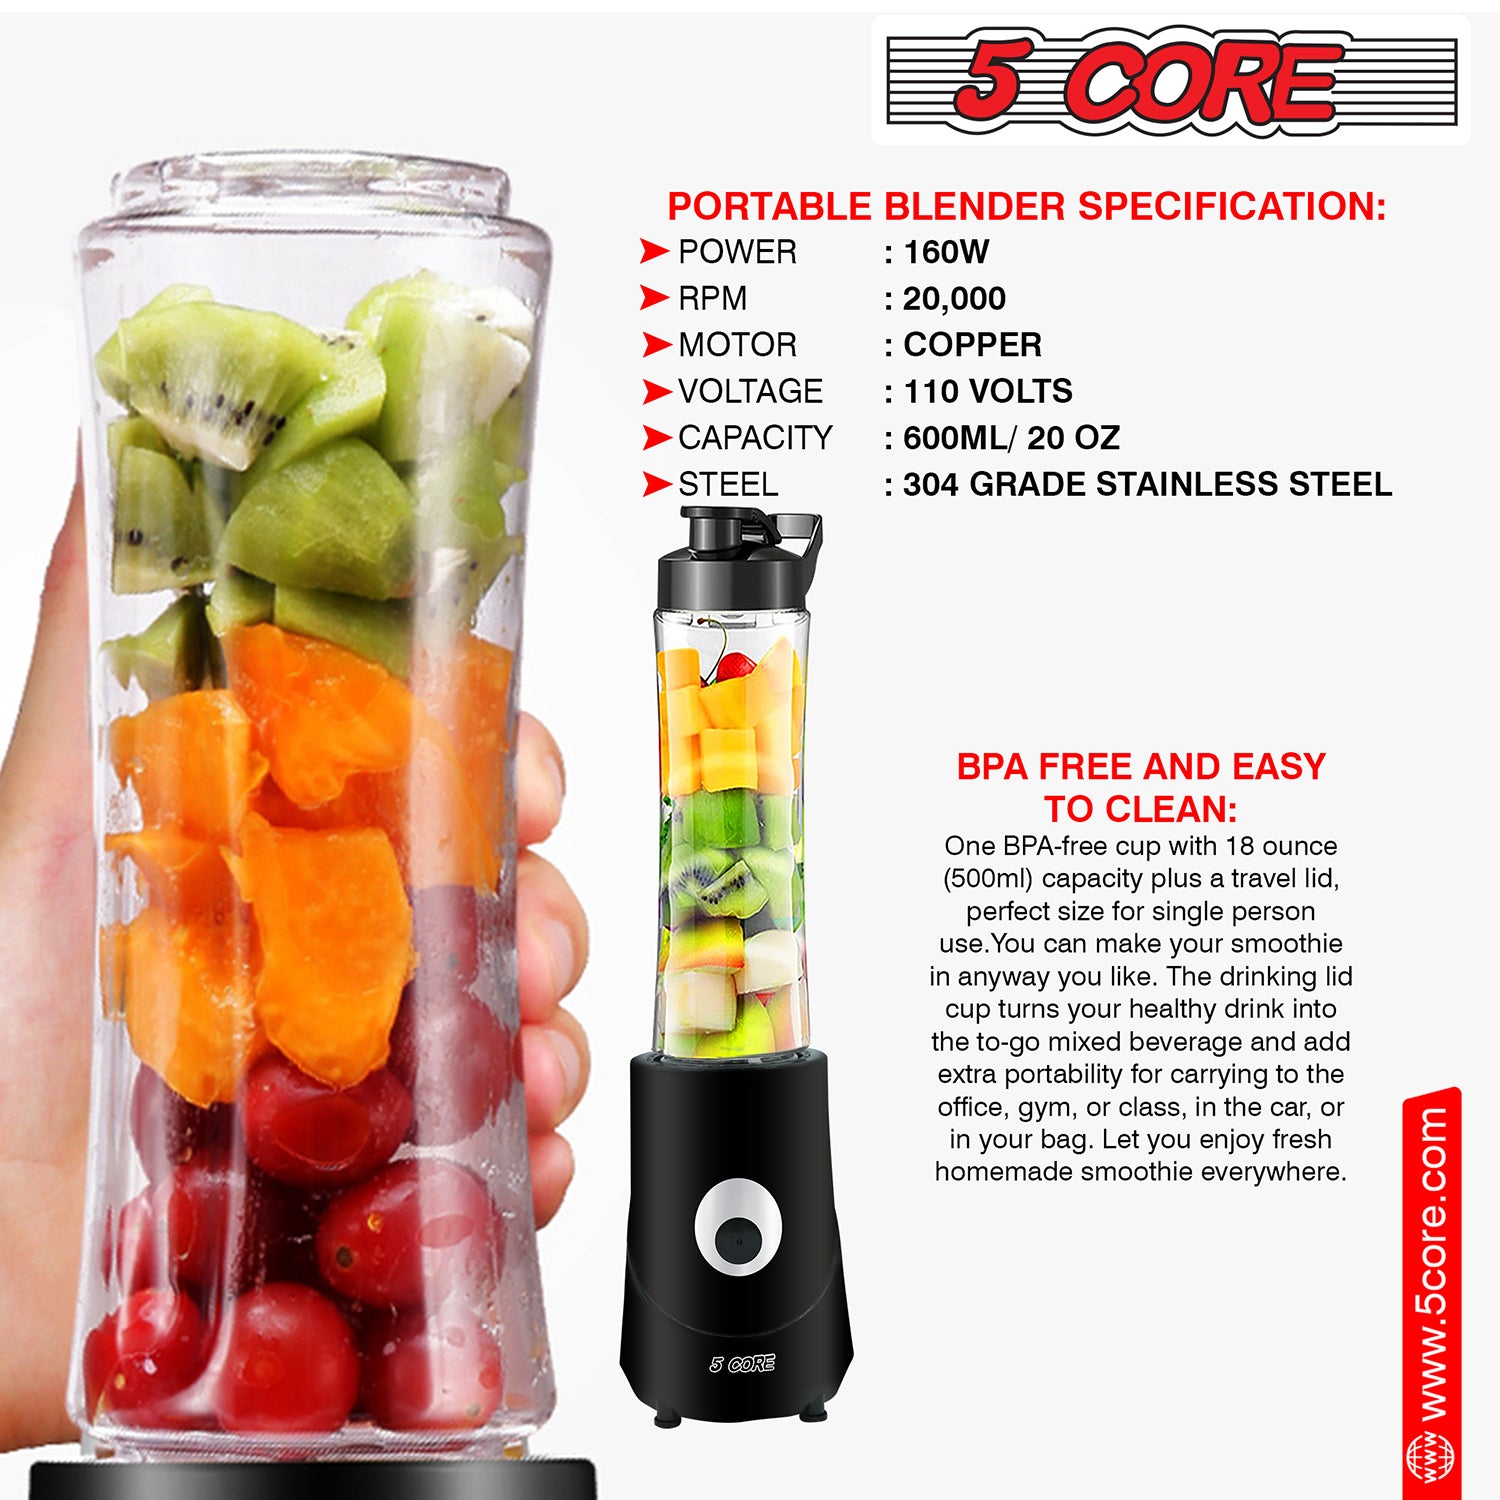 5Core Portable Blender For Kitchen 20 Oz Capacity 160W Personal Blenders Small Smoothie Maker